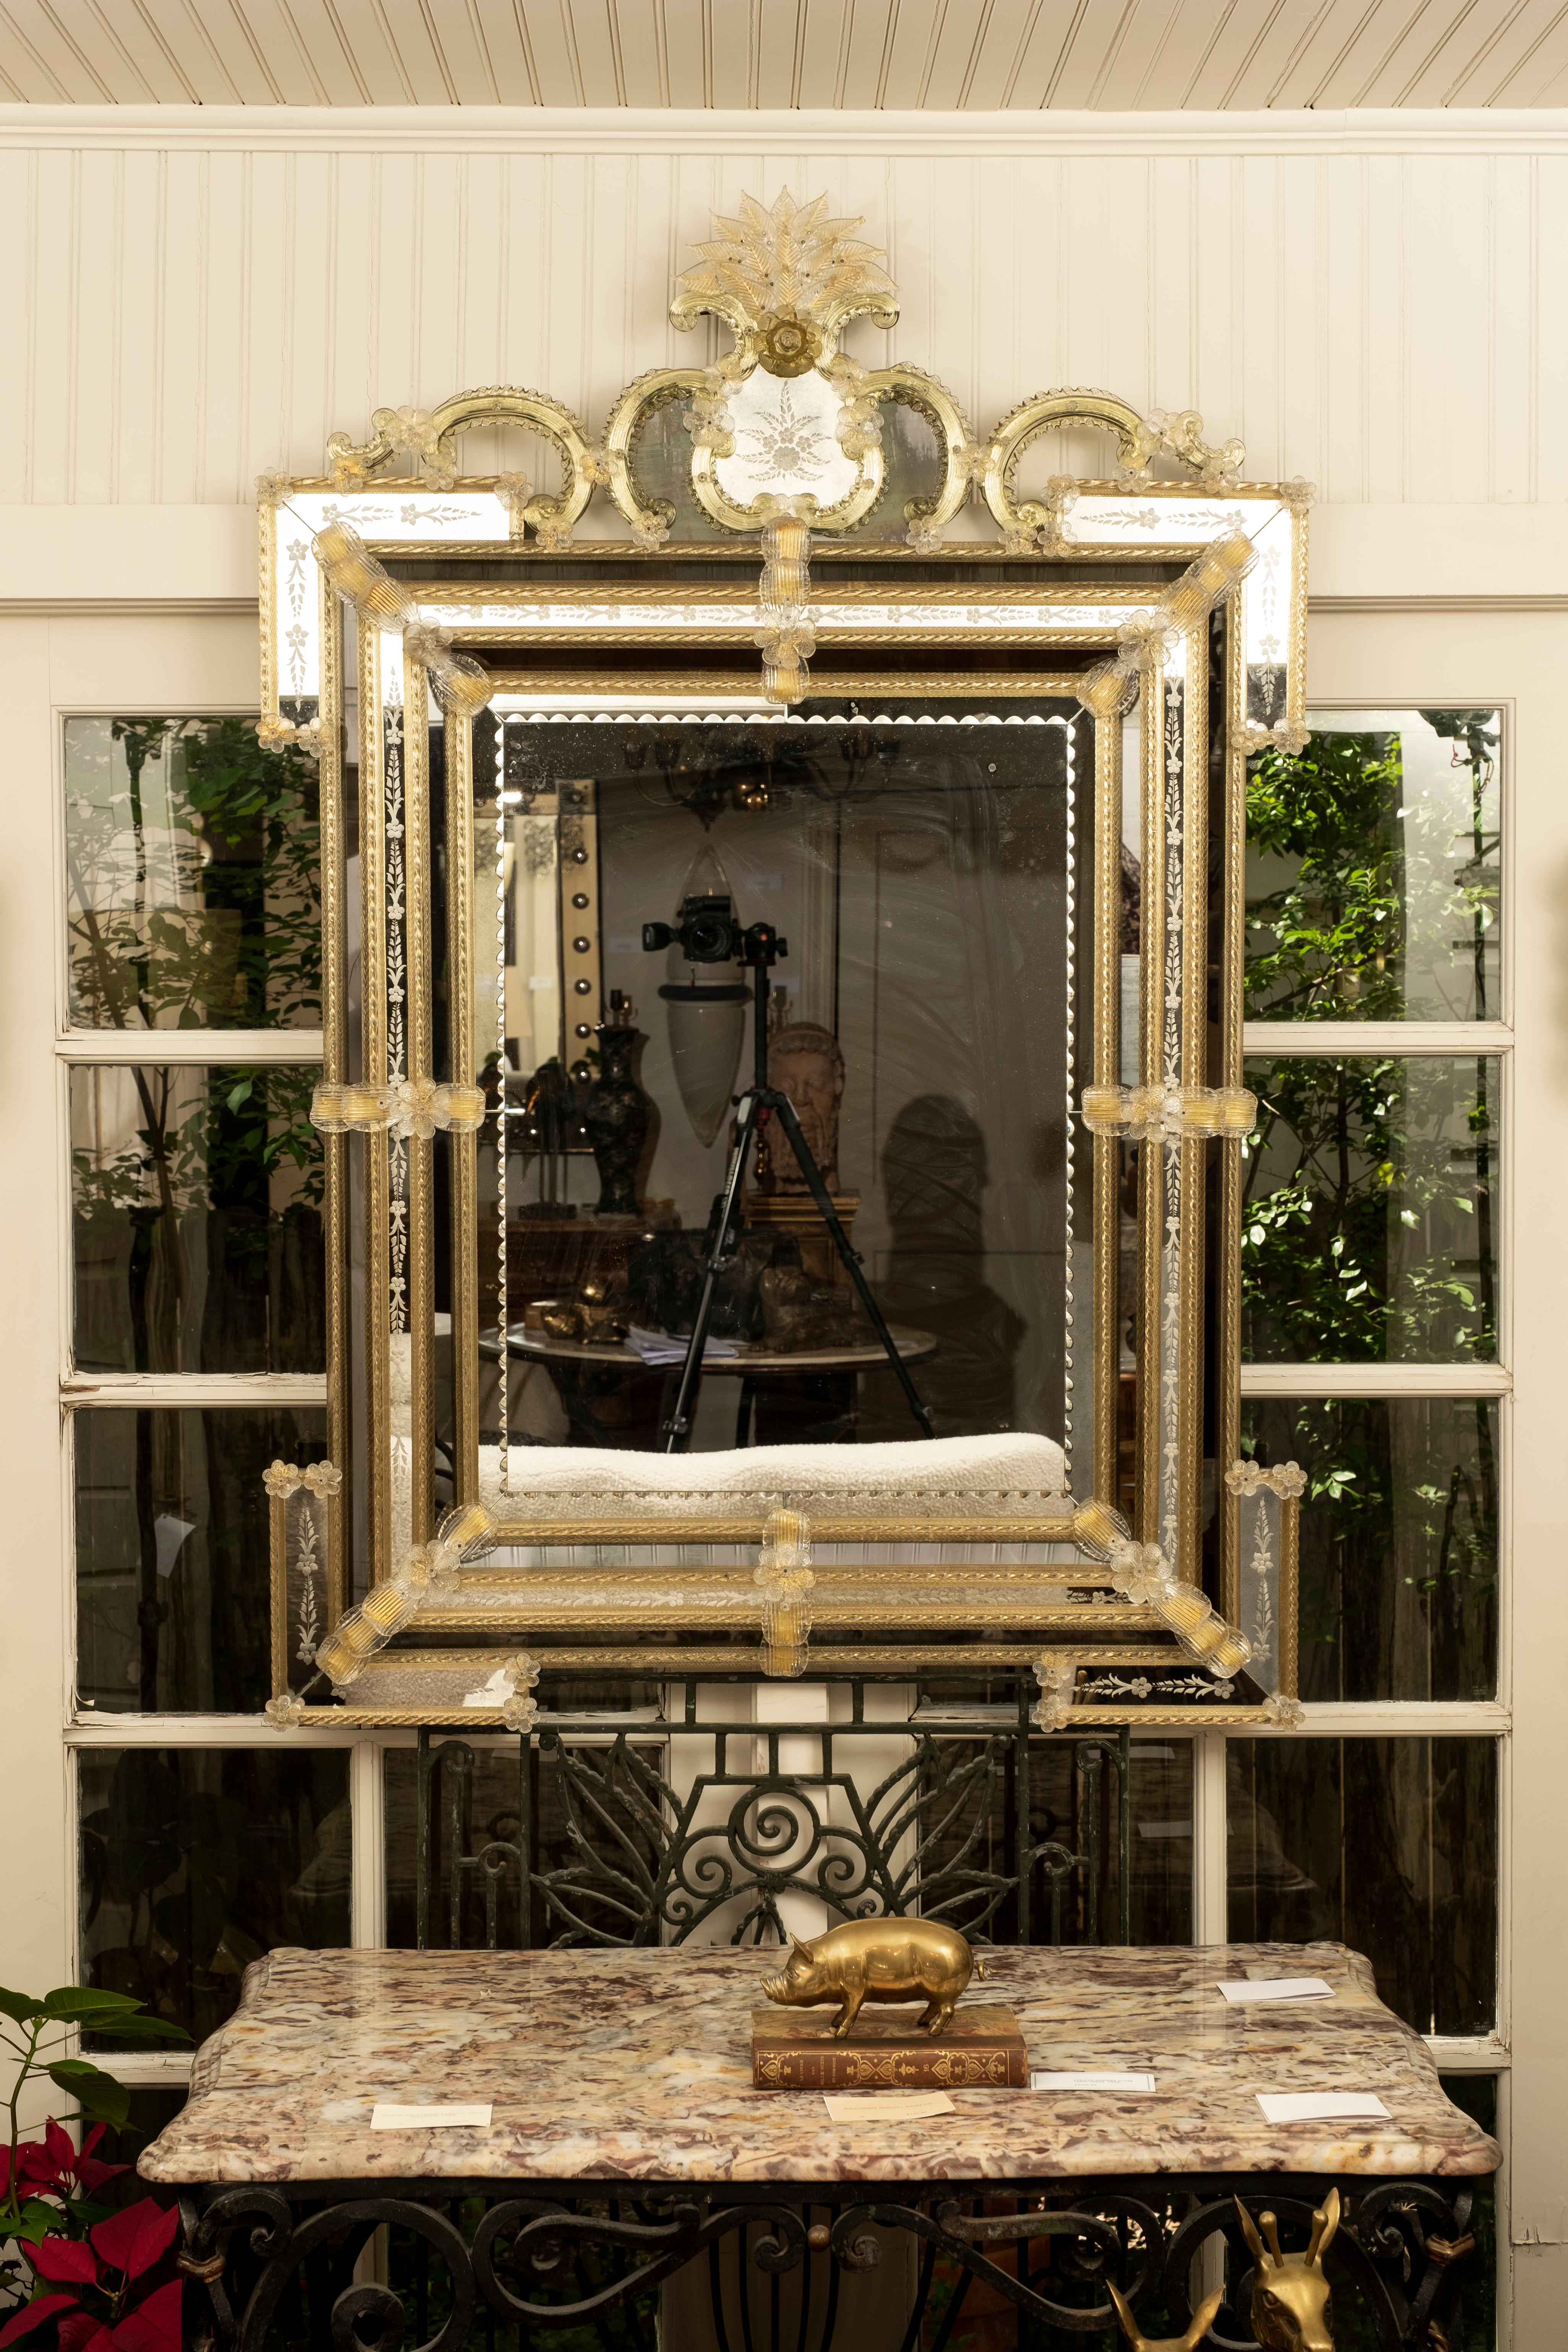 19th Century Venetian mirror-etched and beveled. This versatile antique venetian mirror is rectangular with beautiful etching, beveling including blown glass flowers and leaves. Stunning!.